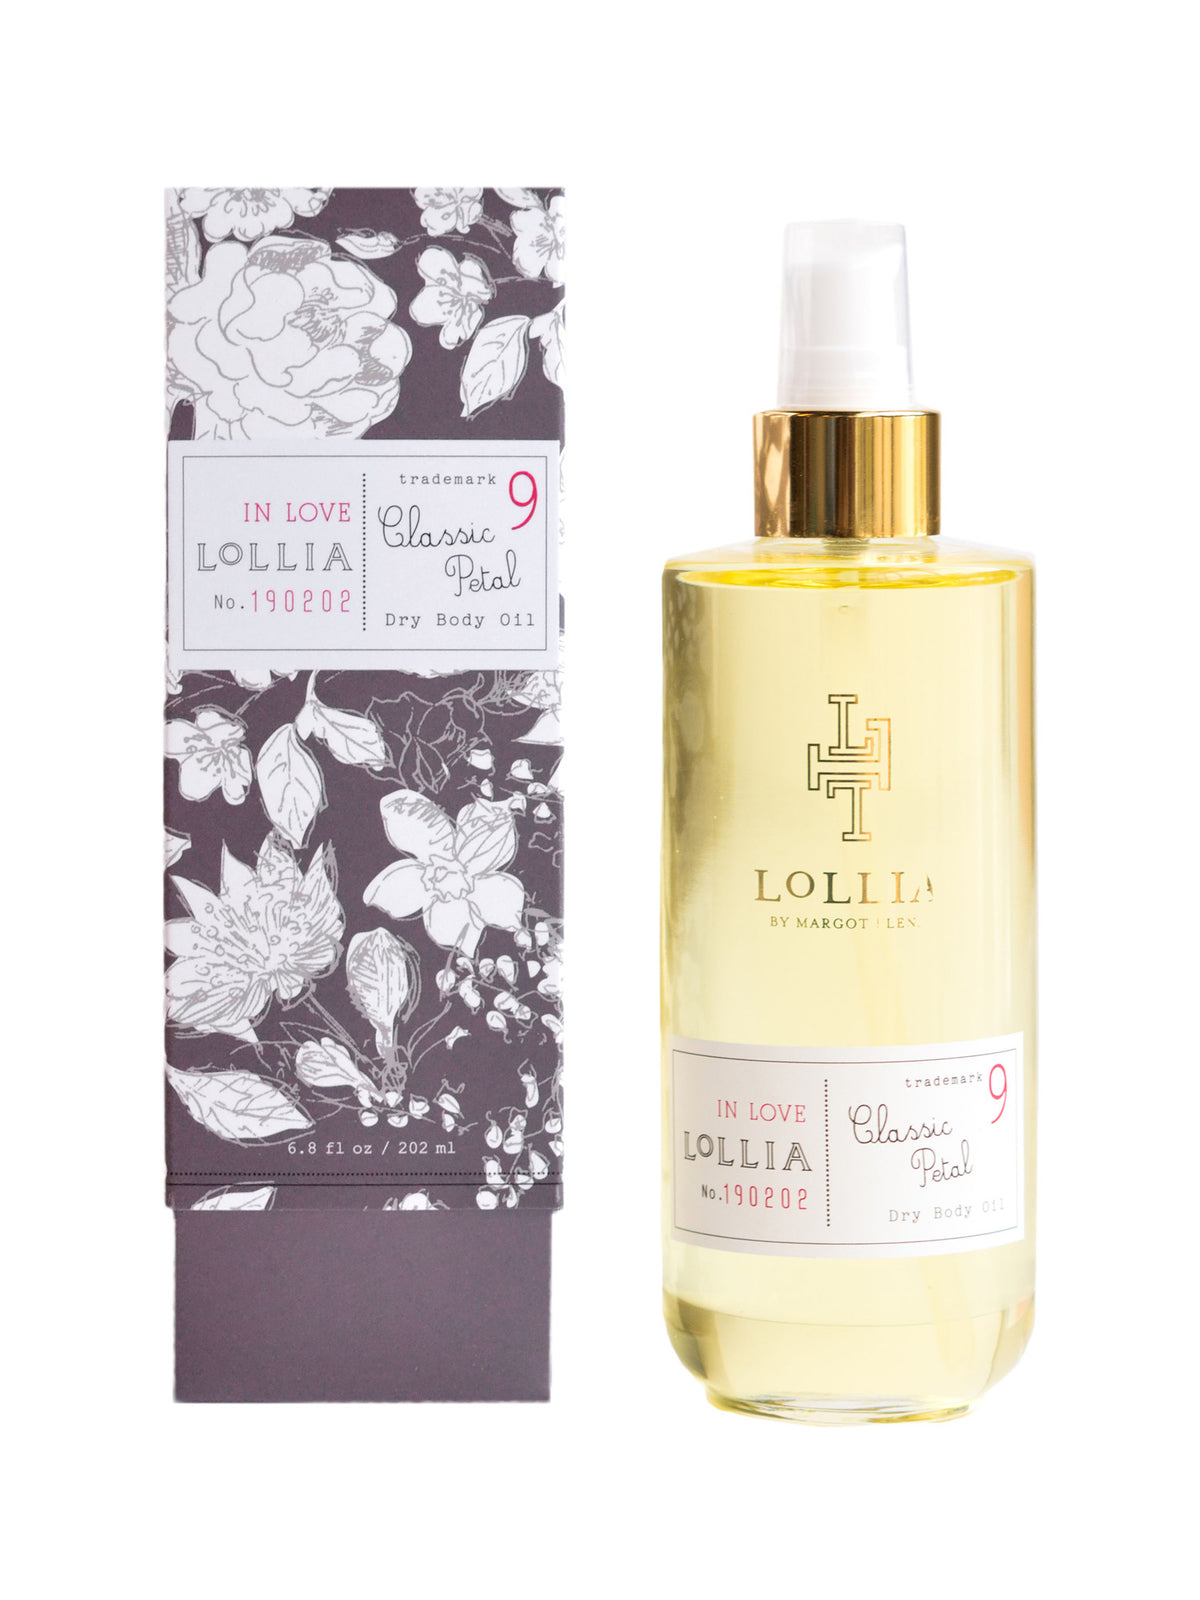 A bottle of Margot Elena Lollia In Love Dry Oil Body next to its floral-patterned packaging box on a white background.